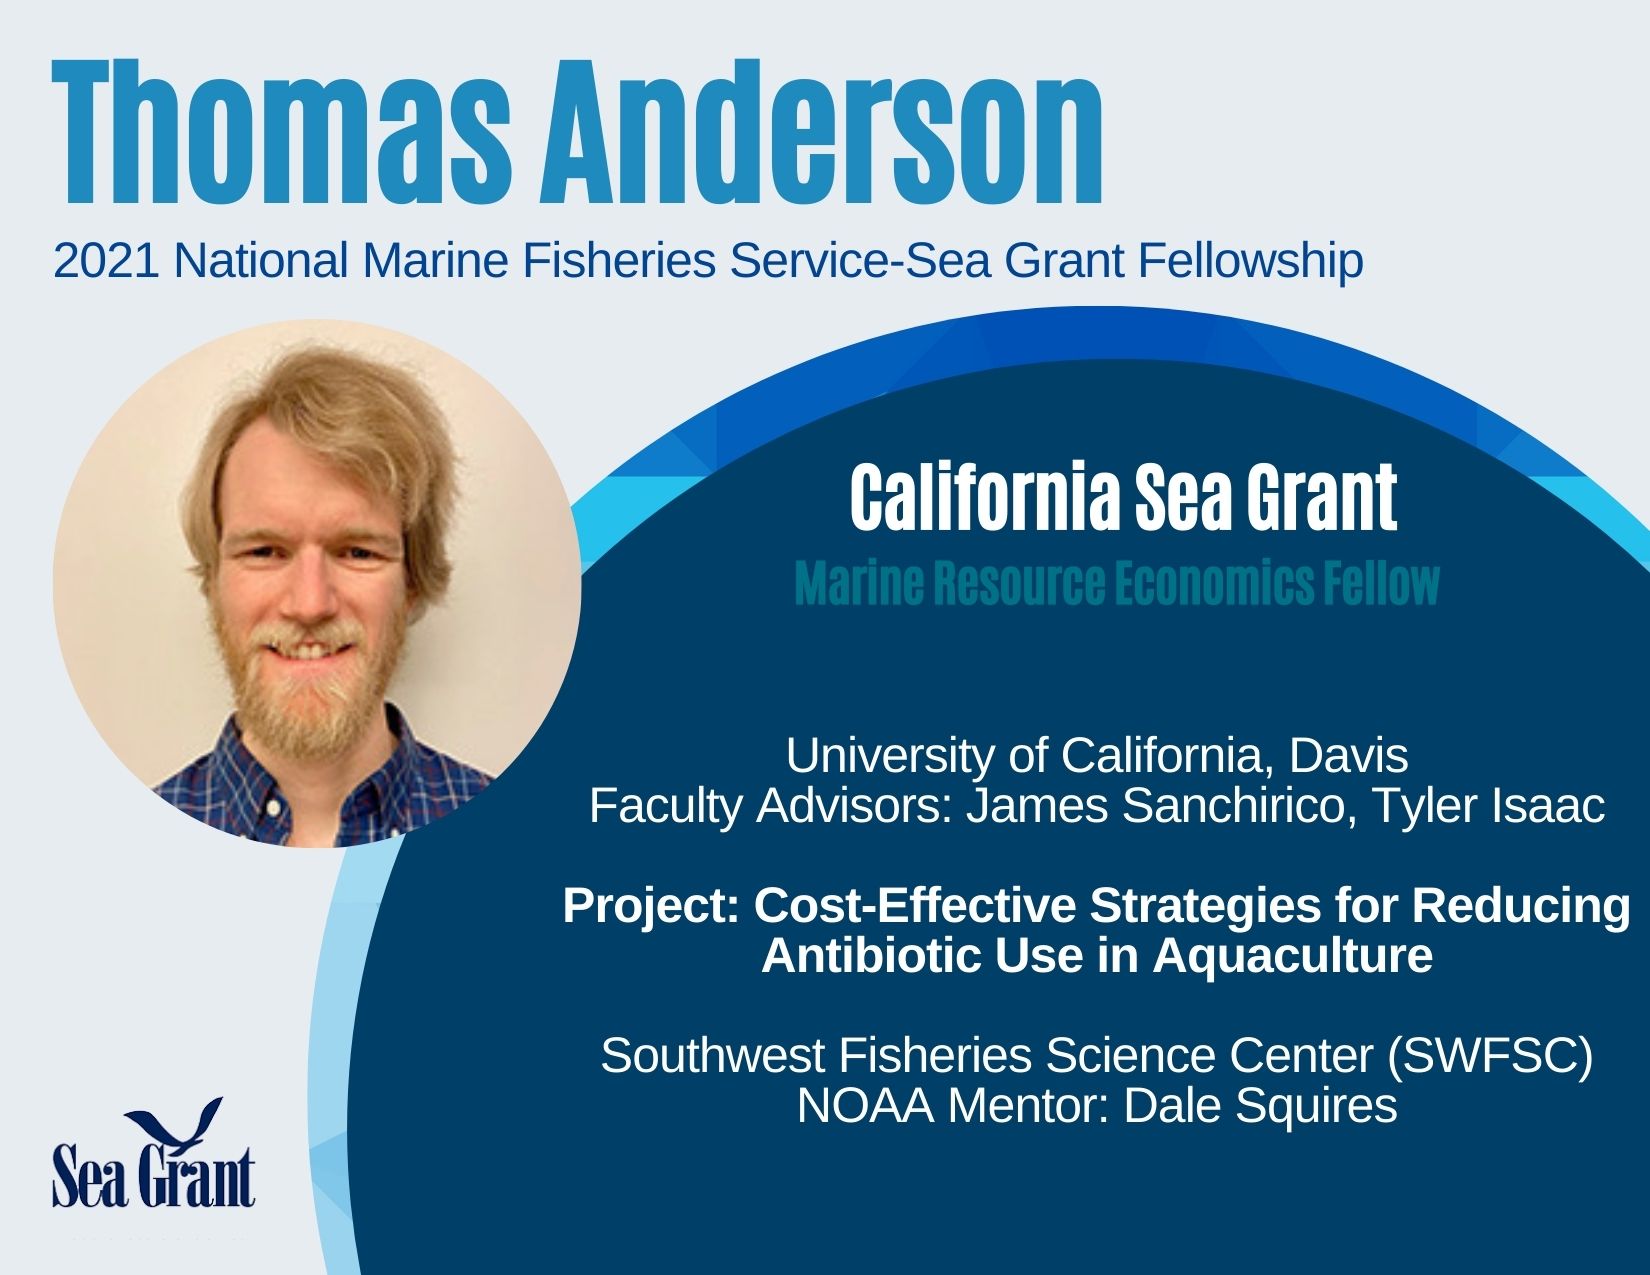 Thomas Anderson, 2021 National Marine Fisheries Service - Sea Grant Fellowship. California Sea Grant Marine Resource Economics Fellow. University of California, Davis. Faculty Advisors: James Sanchirico, Tyler Isaac. Project: Cost-Effective Strategies for Reducing Antibiotic Use in Aquaculture. Southwest Fisheries Science Center (SWFSC) NOAA Mentor: Dale Squires